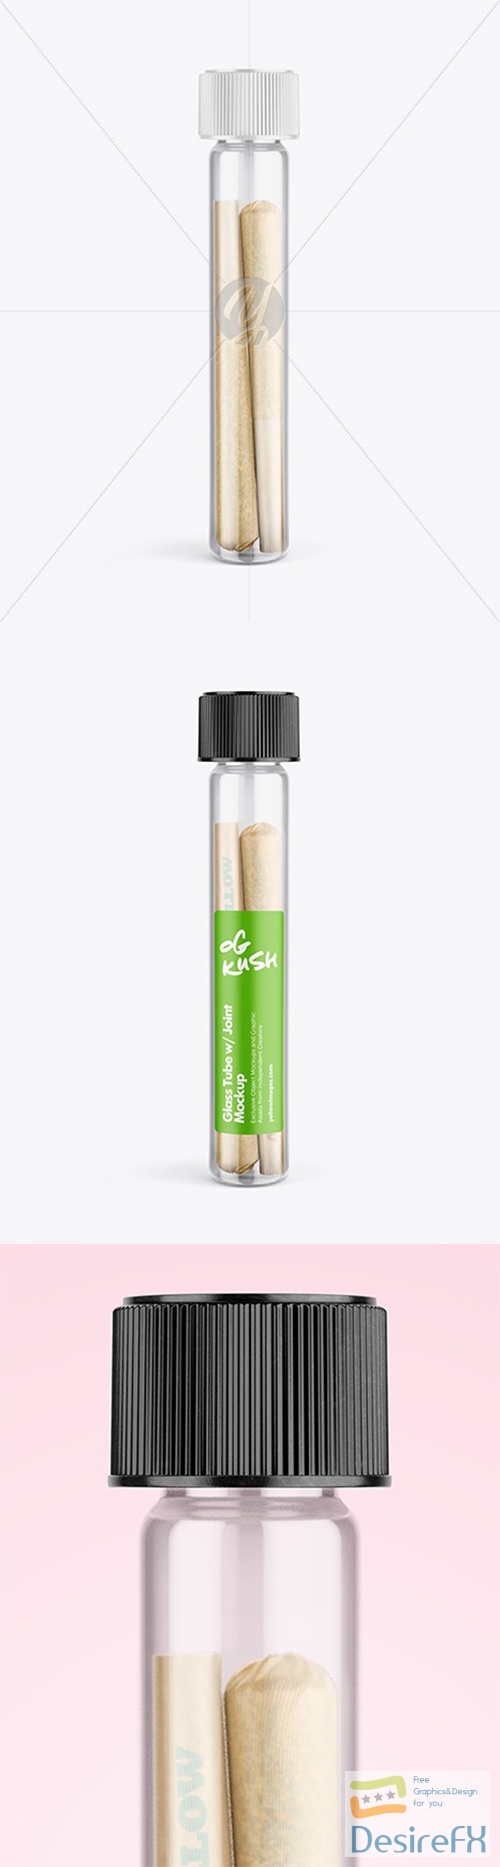 Glass Tube w/ Two Weed Joints Mockup 47621